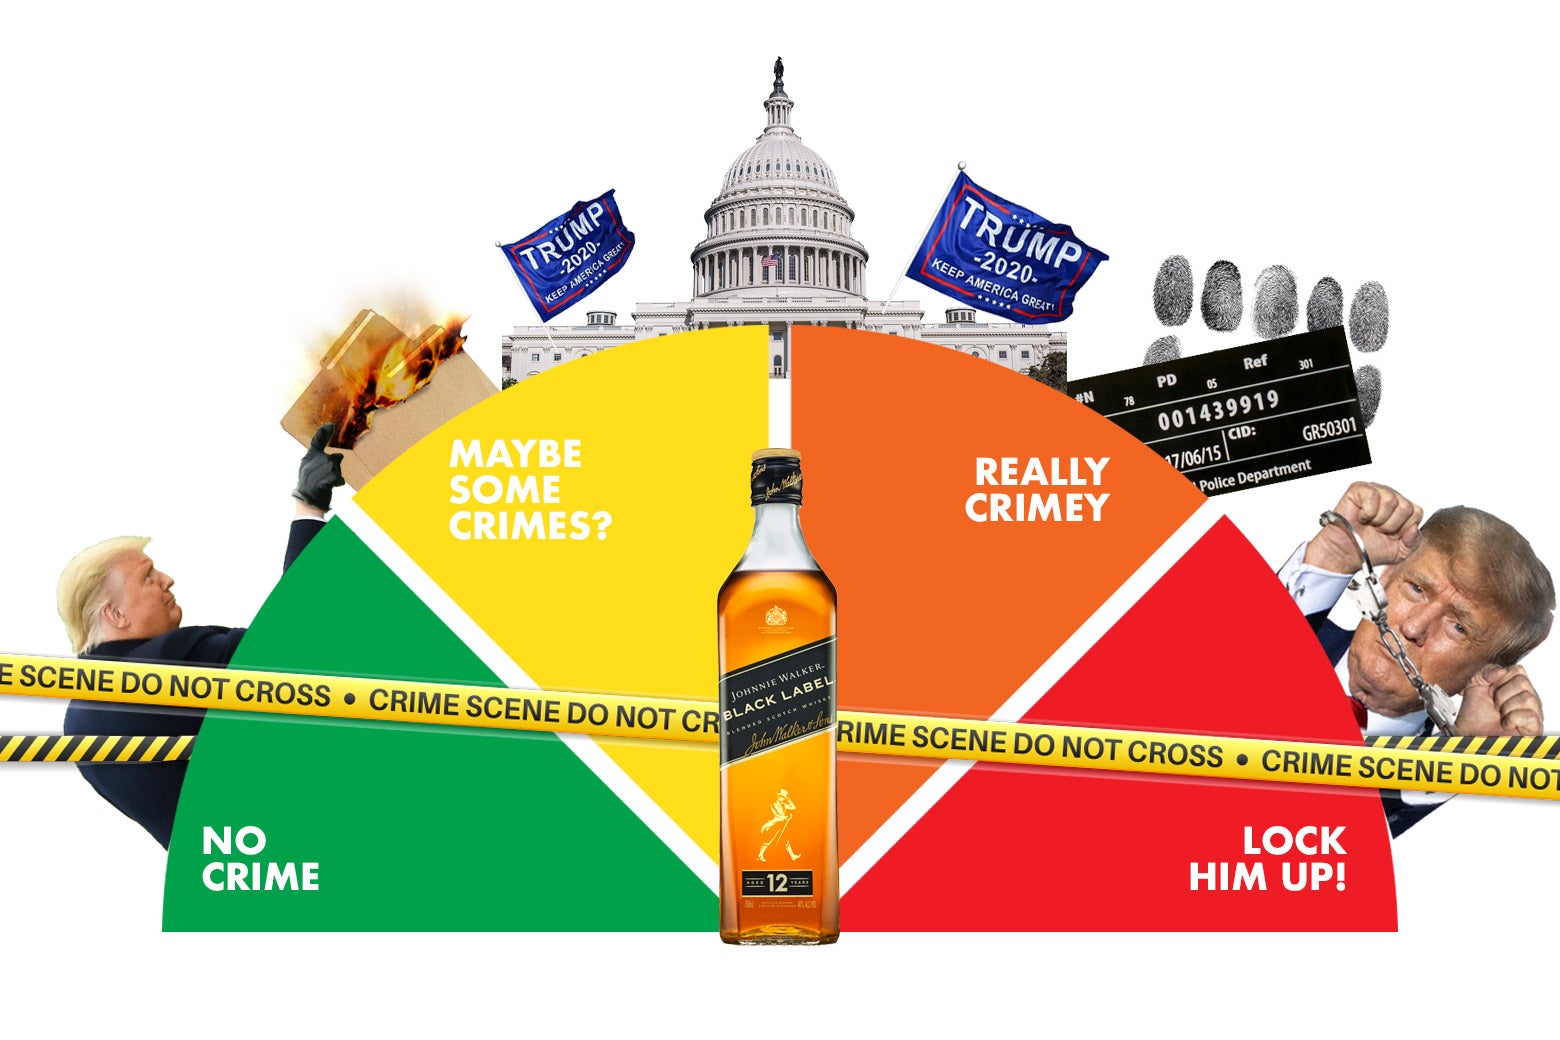 The Crime-O-Meter, whose four sections go from No Crime to Maybe Some Crimes to Really Crimey to Lock Him Up. A bottle of Johnnie Walker is pointing straight up between Maybe Some Crimes and Really Crime-y.